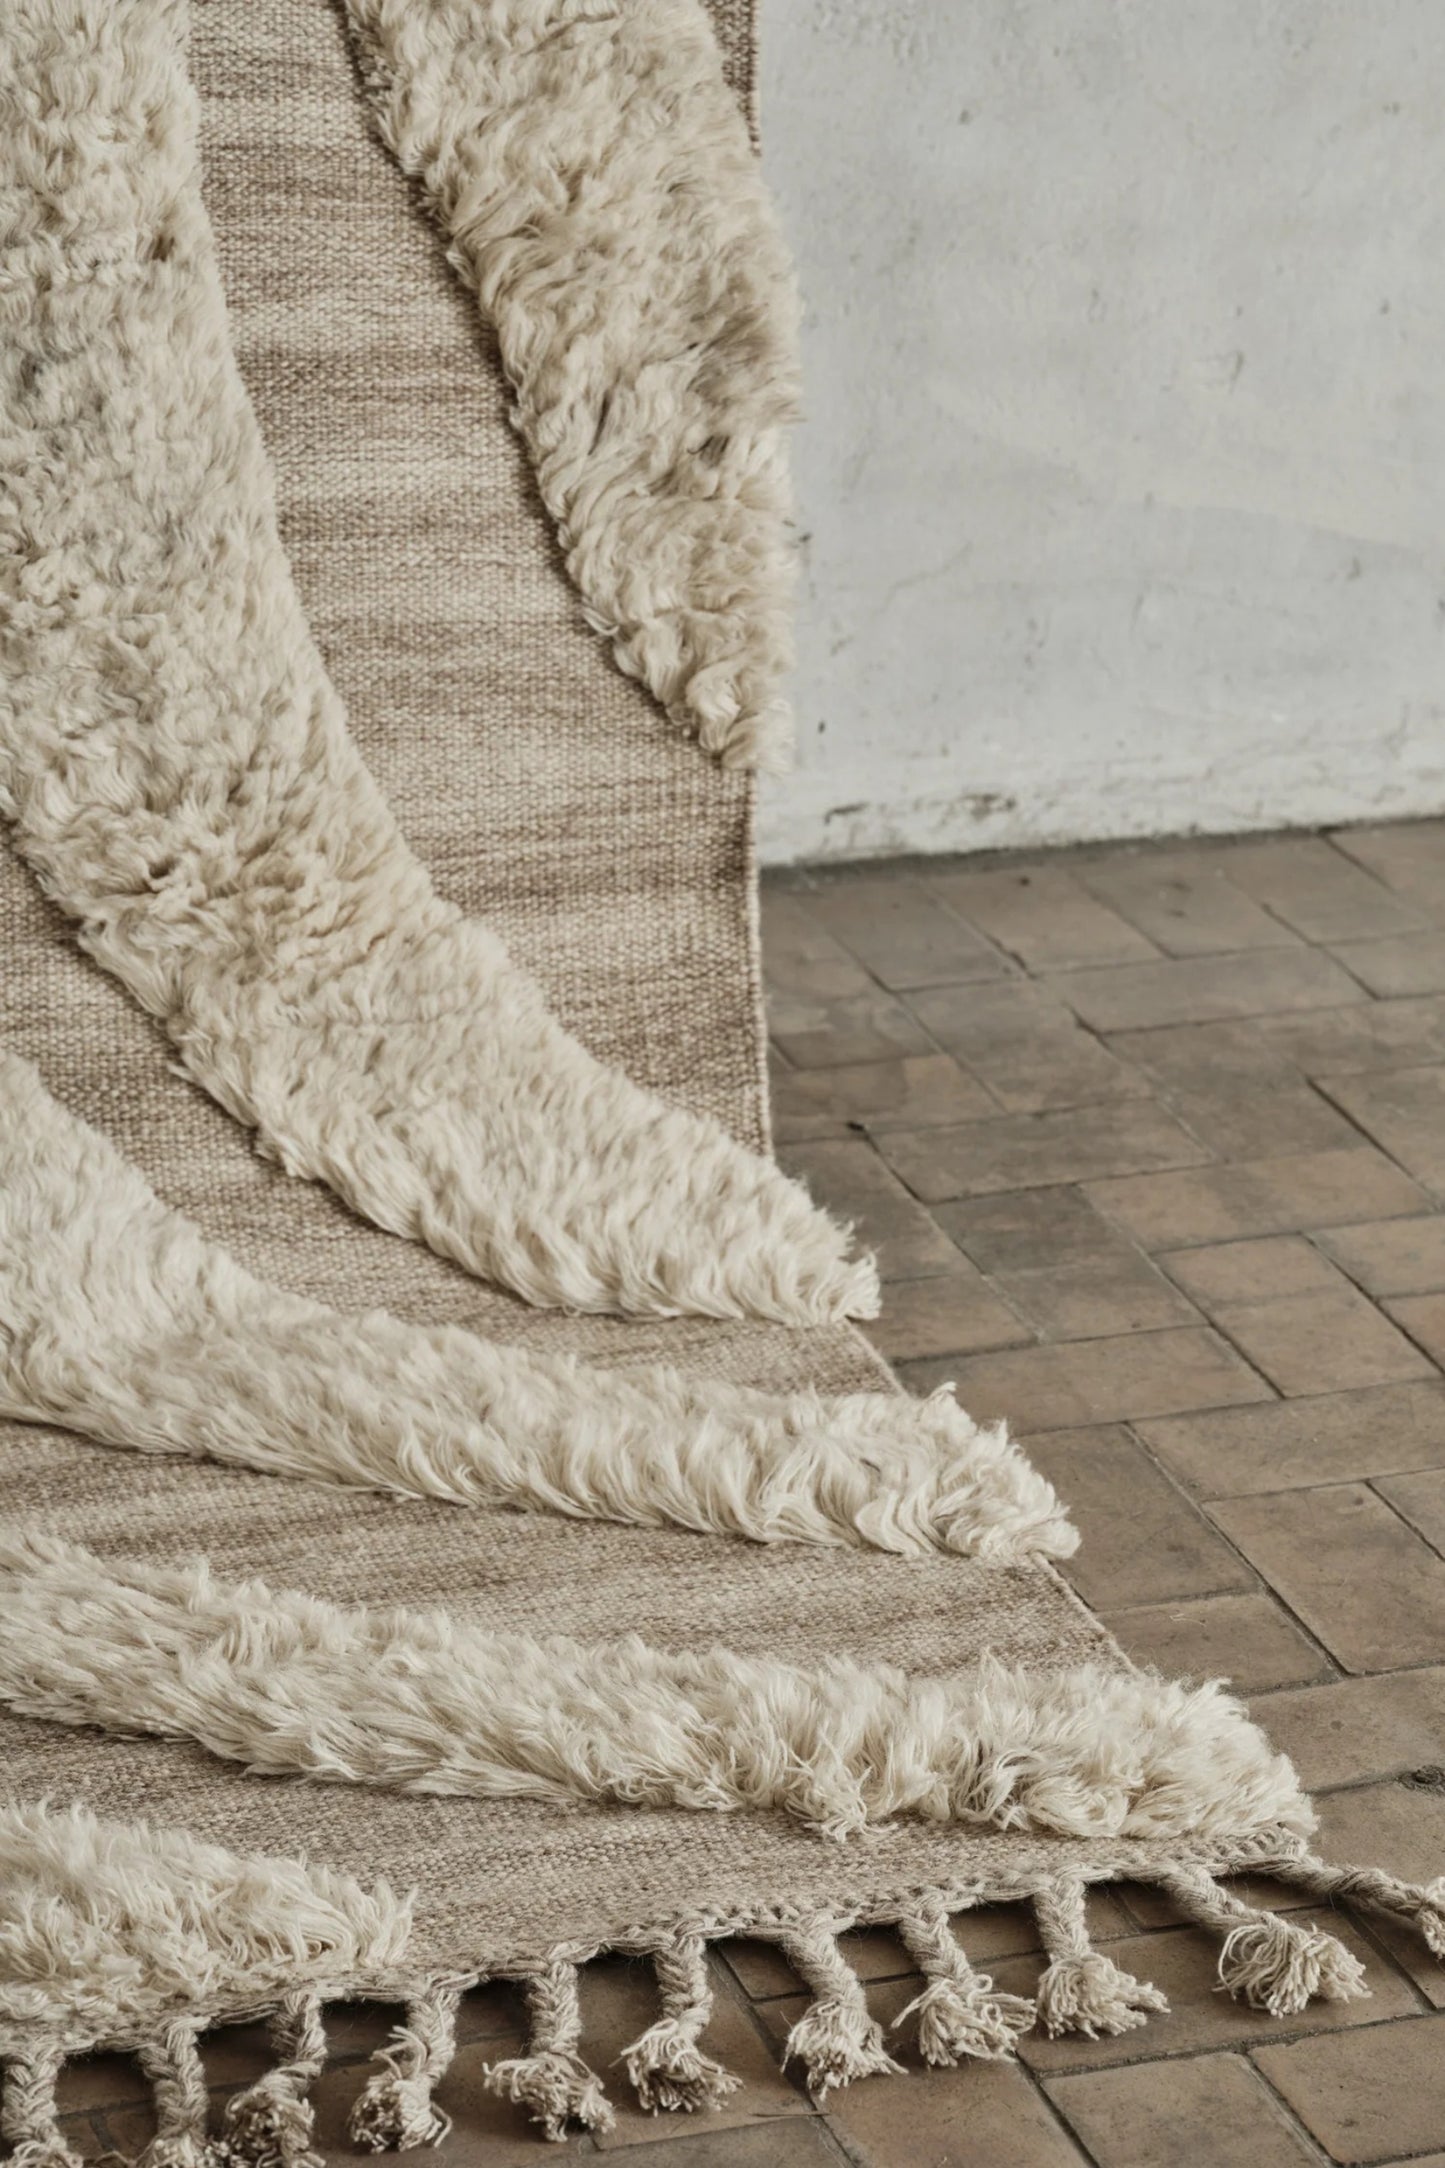 Handwoven Rug No.02 by Cappelen Dimyr - details of abstract strokes with tassels